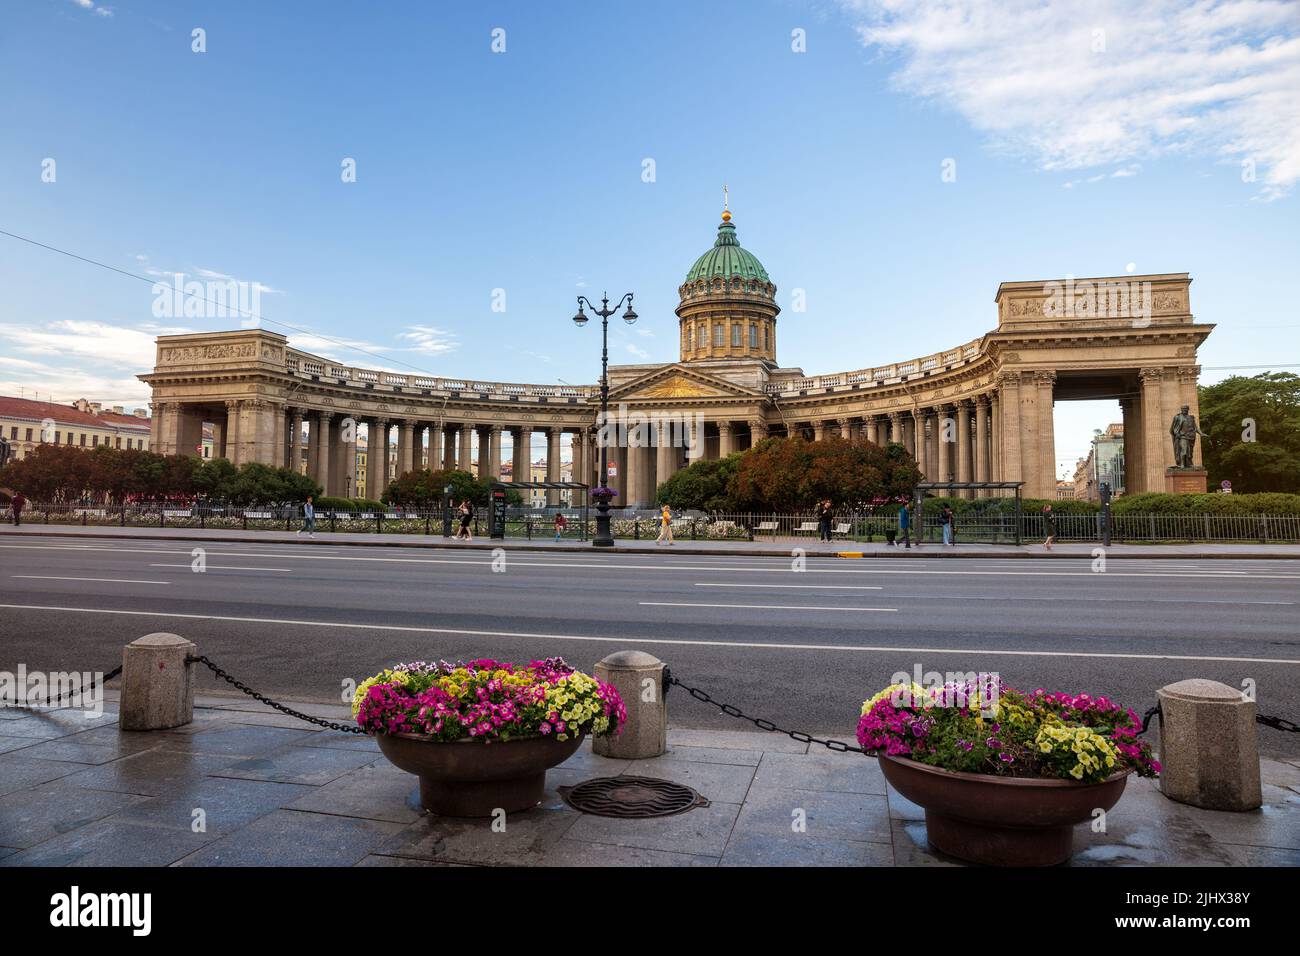 St. Petersburg, Russia - July 17, 2022: Kazan Cathedral (Cathedral of Our Lady of Kazan) and Nevsky Prospekt in St. Petersburg, Russia Stock Photo